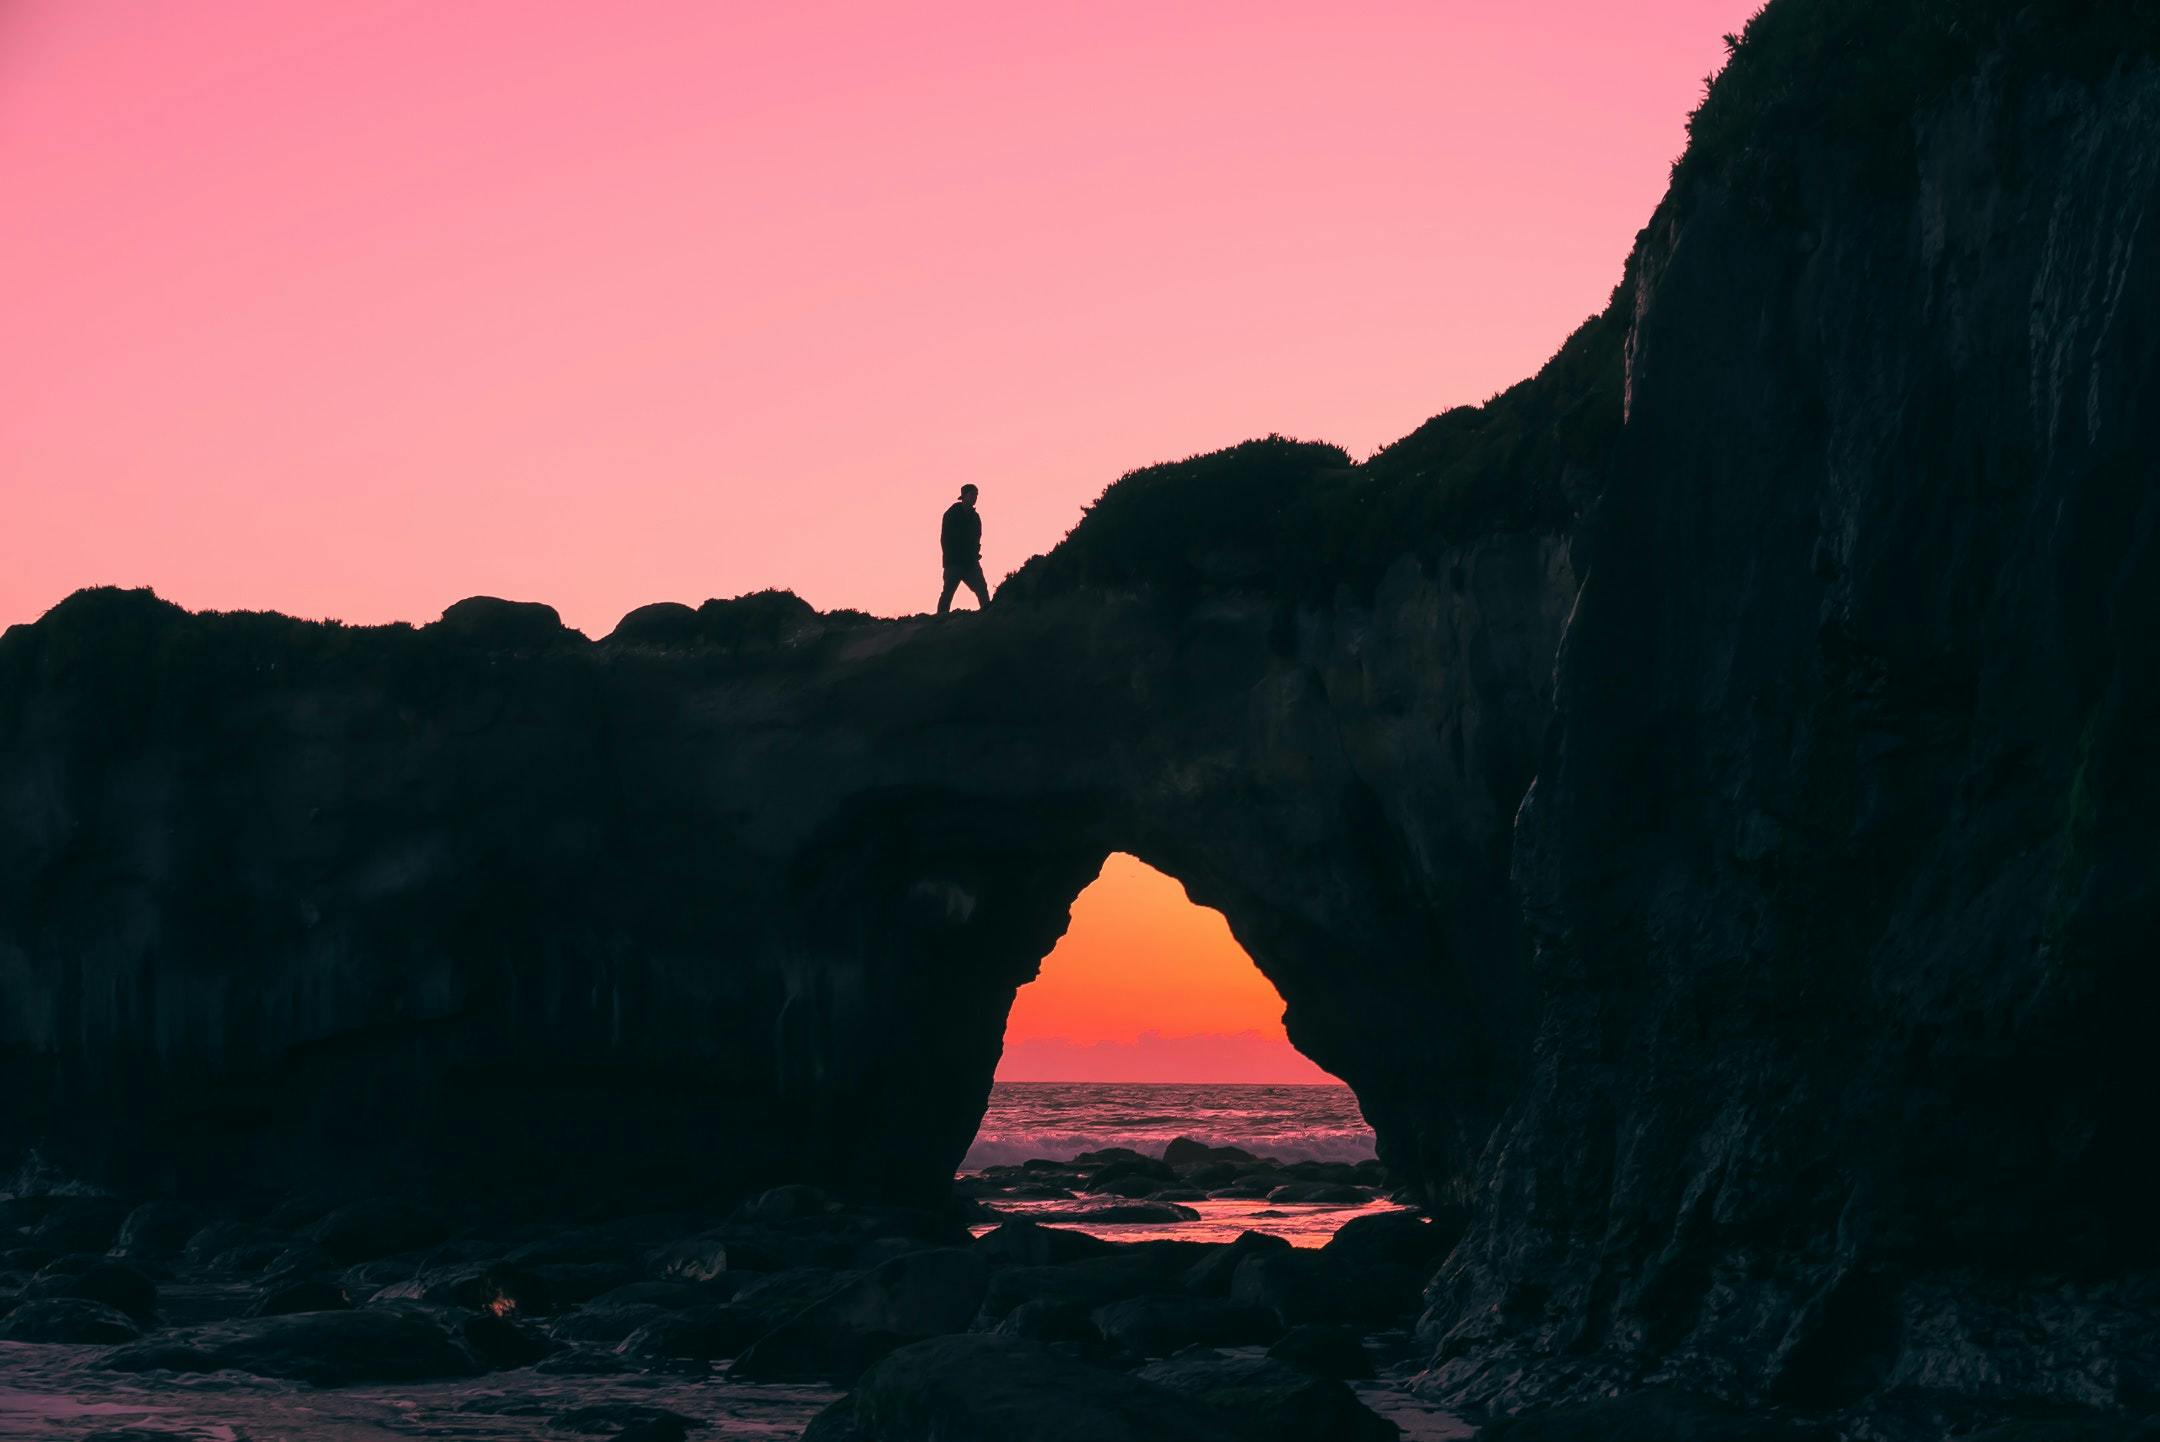 Photo by Jeff Nissen of silhouette of someone walking on cliff edge during sunset